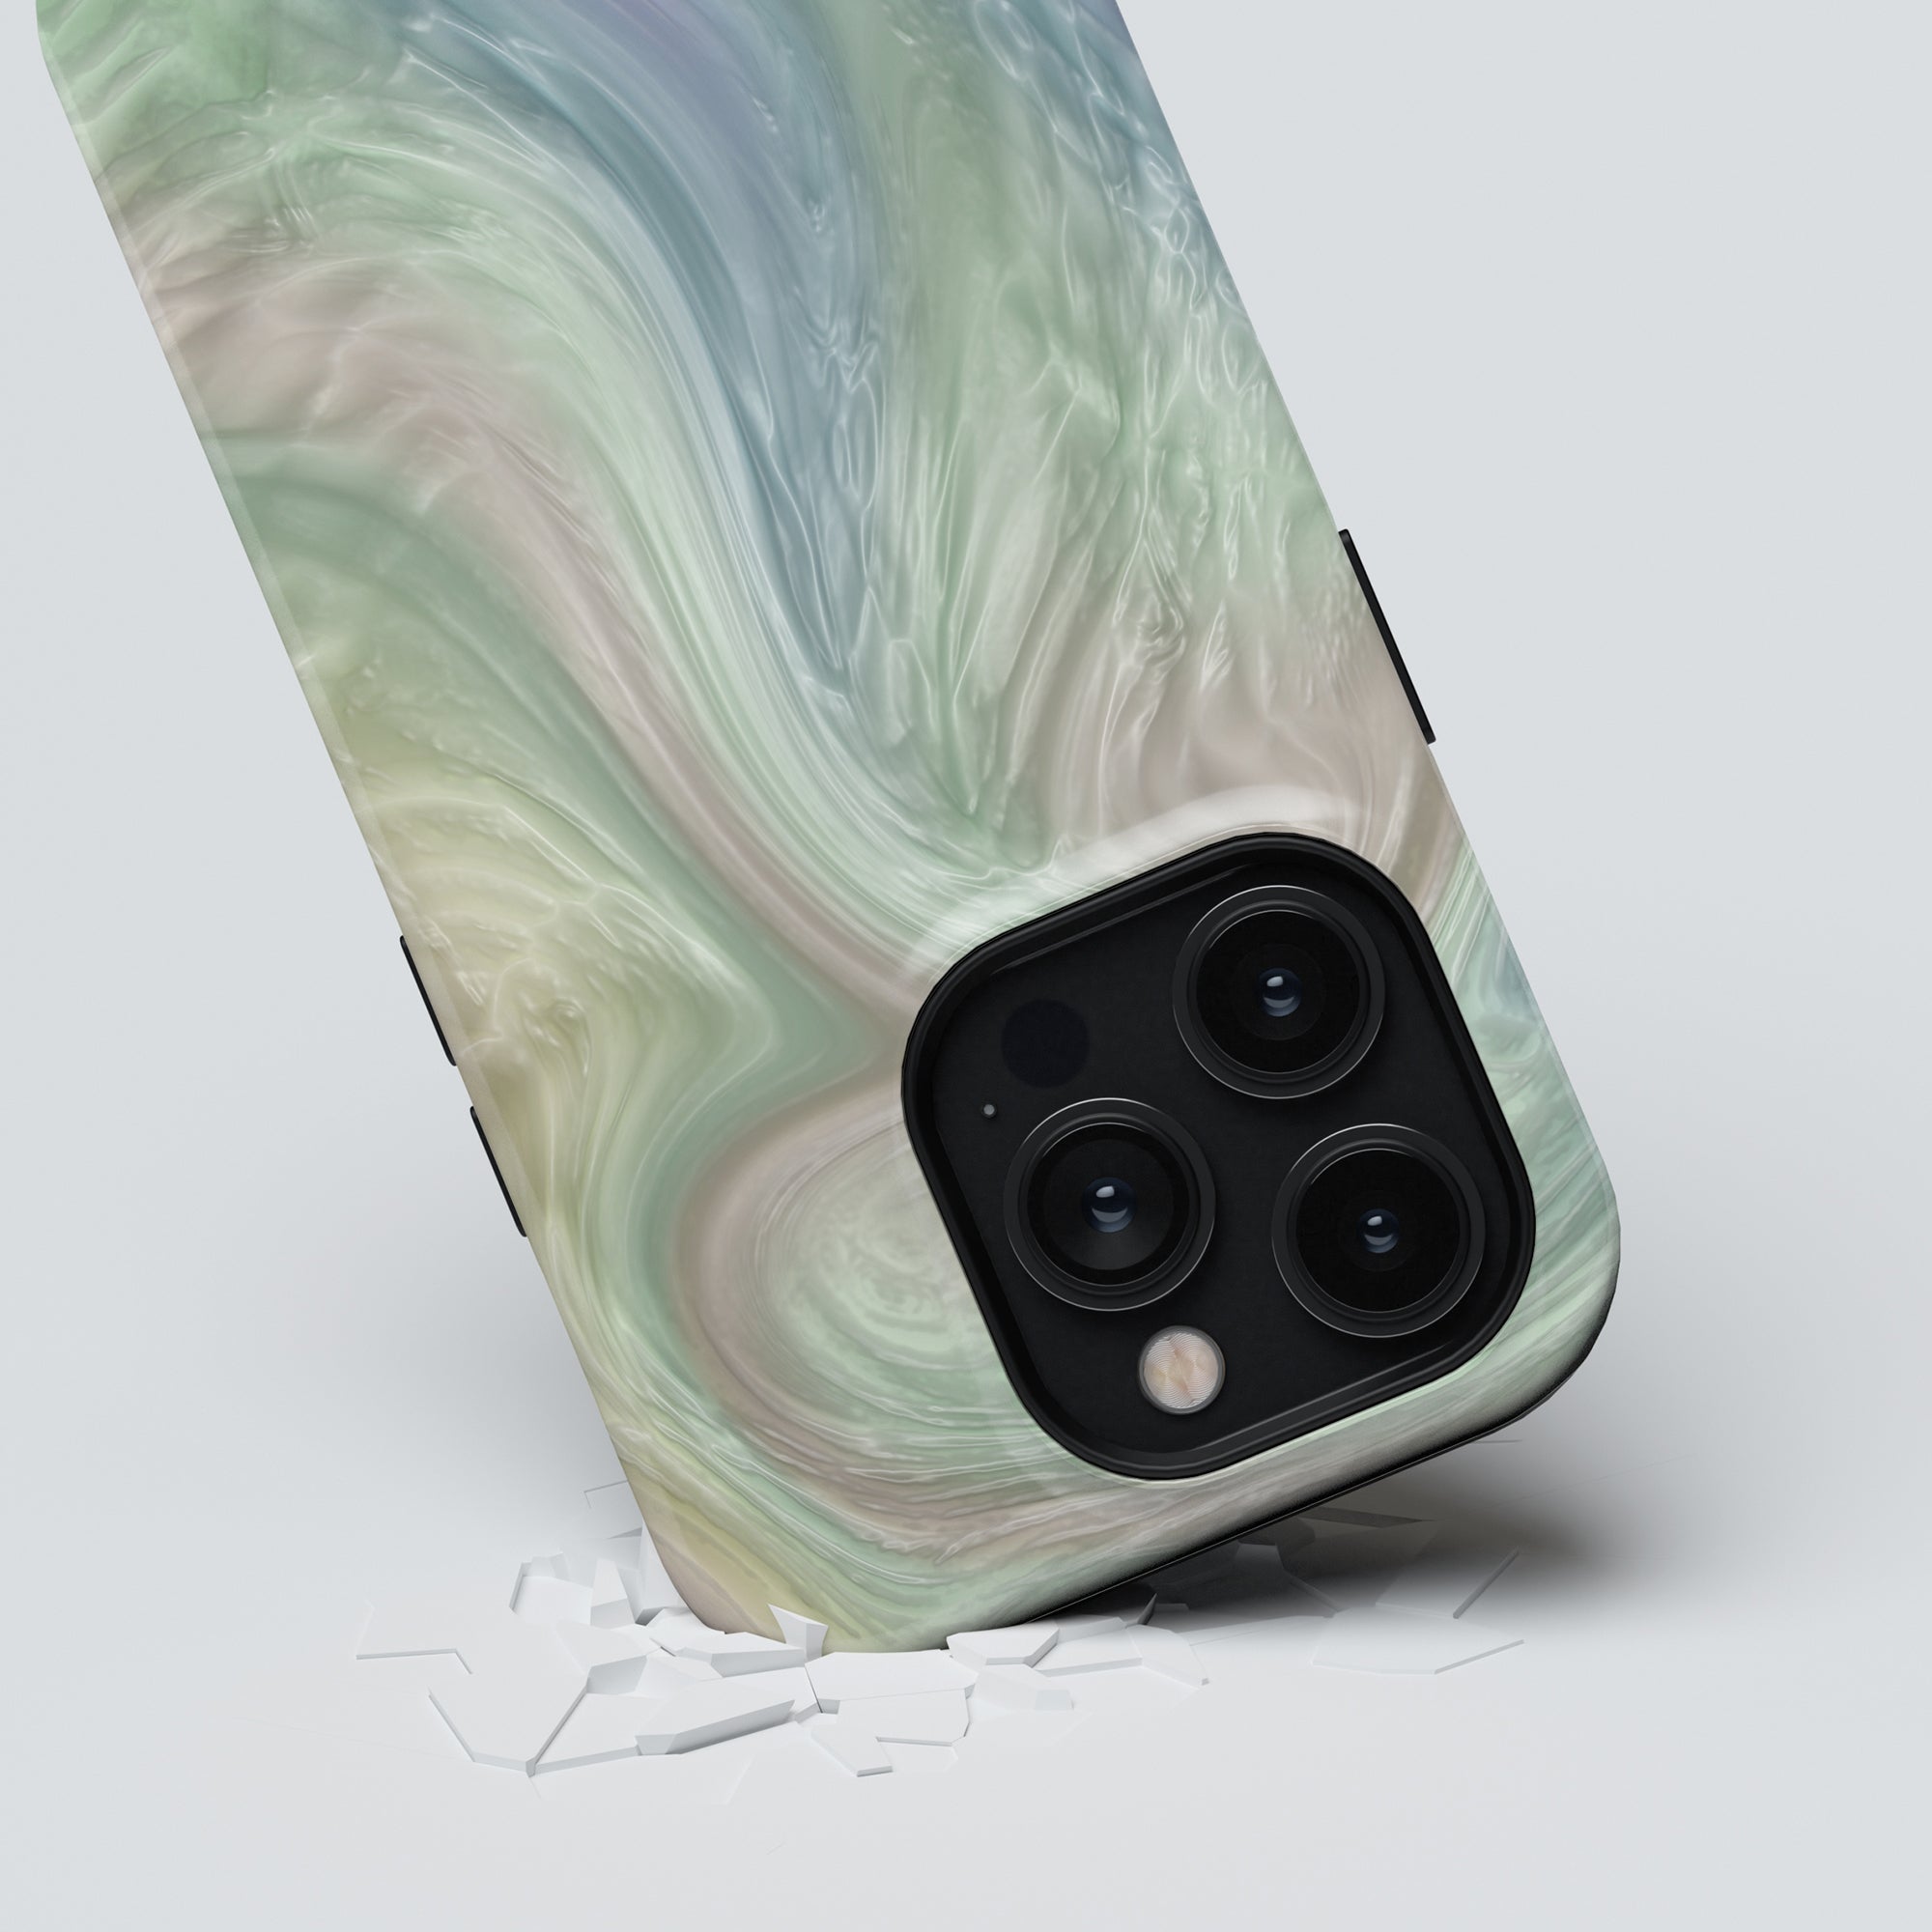 A smartphone with a marbled green Nacre - Tough Case lying on a white surface, with its triple-lens camera facing up and glass fragments scattered nearby.